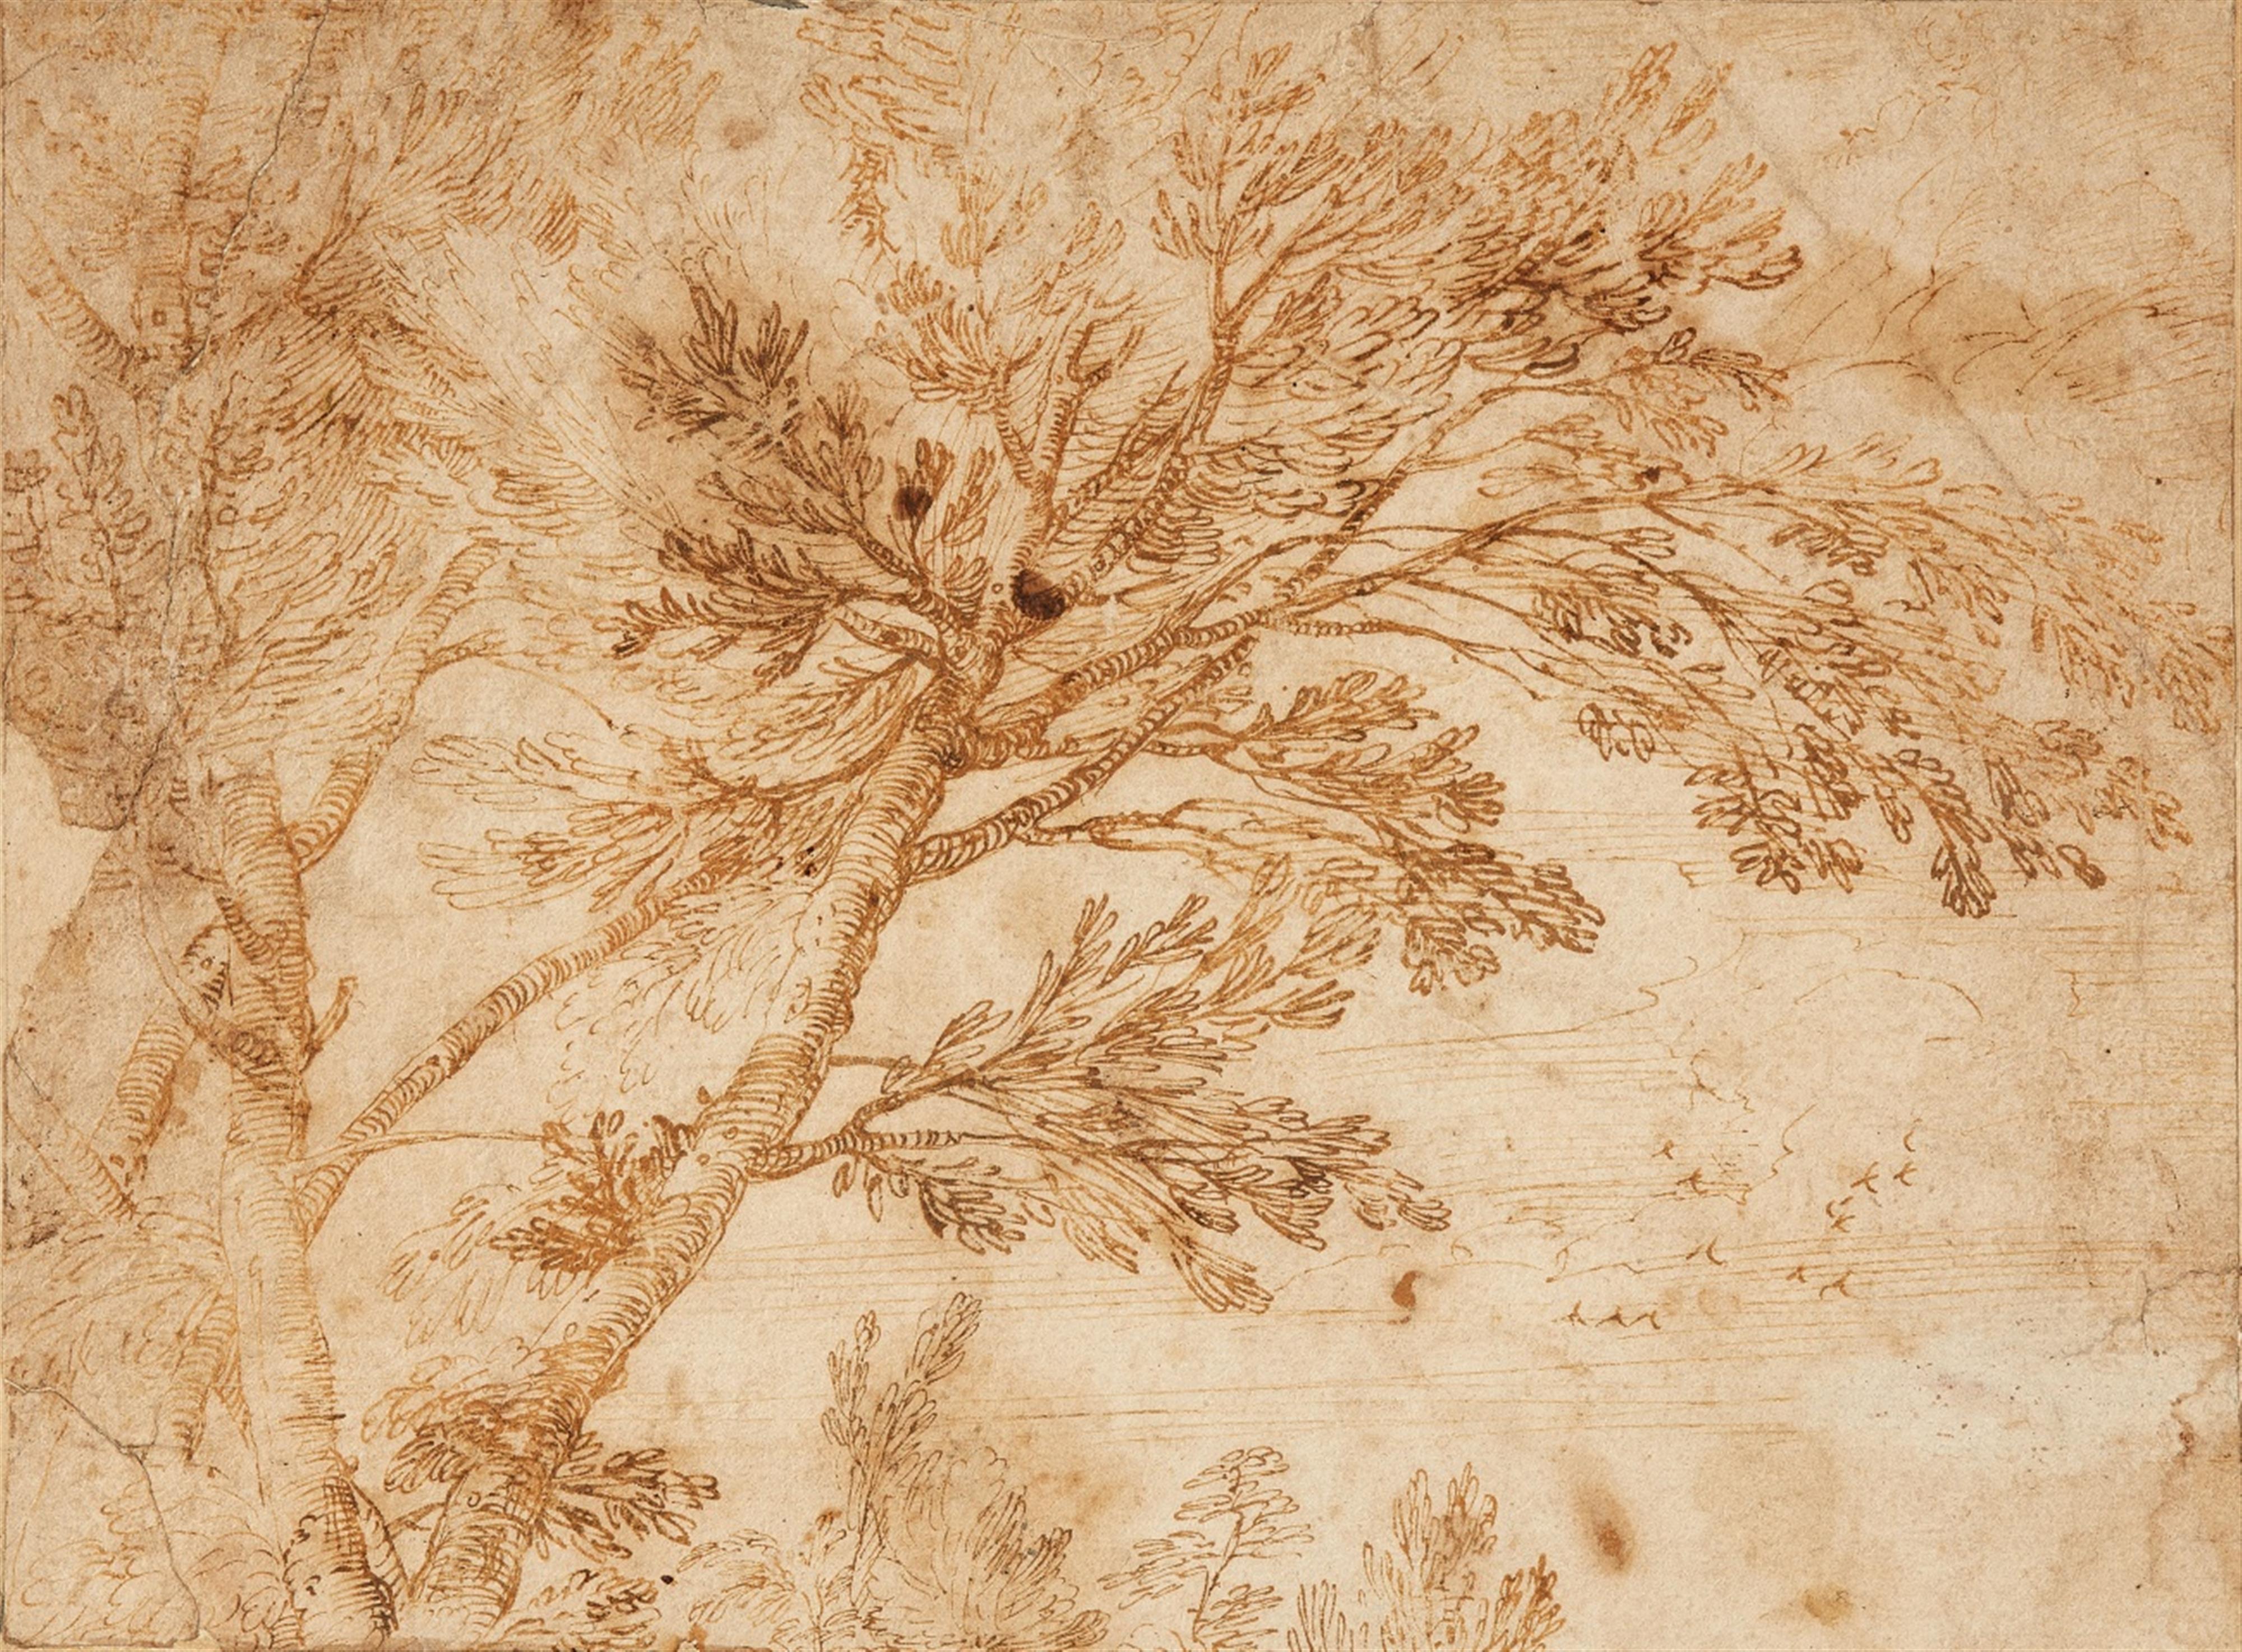 Annibale Carracci - Study of a Tree - image-1